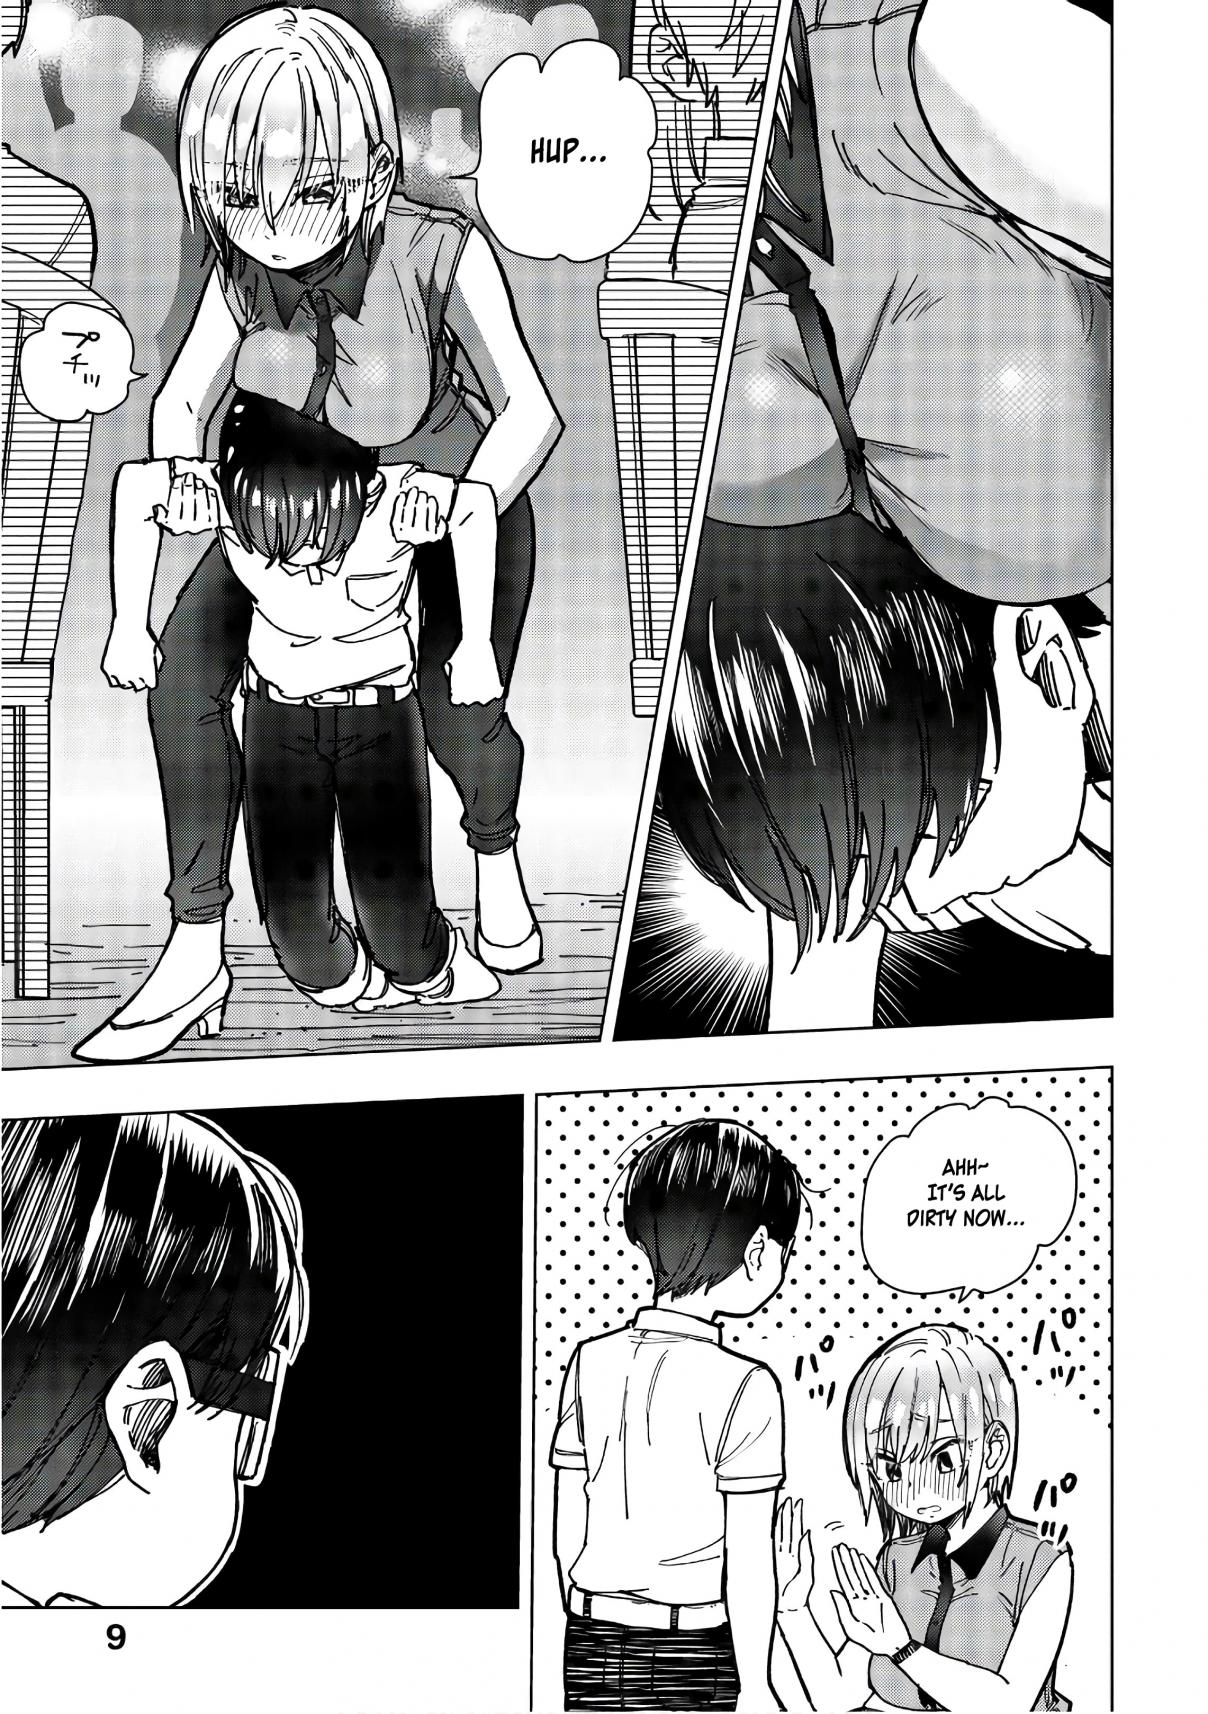 Eguchi kun Doesn't Miss a Thing Vol. 3 Ch. 13 A Slightly Erotic Grilling